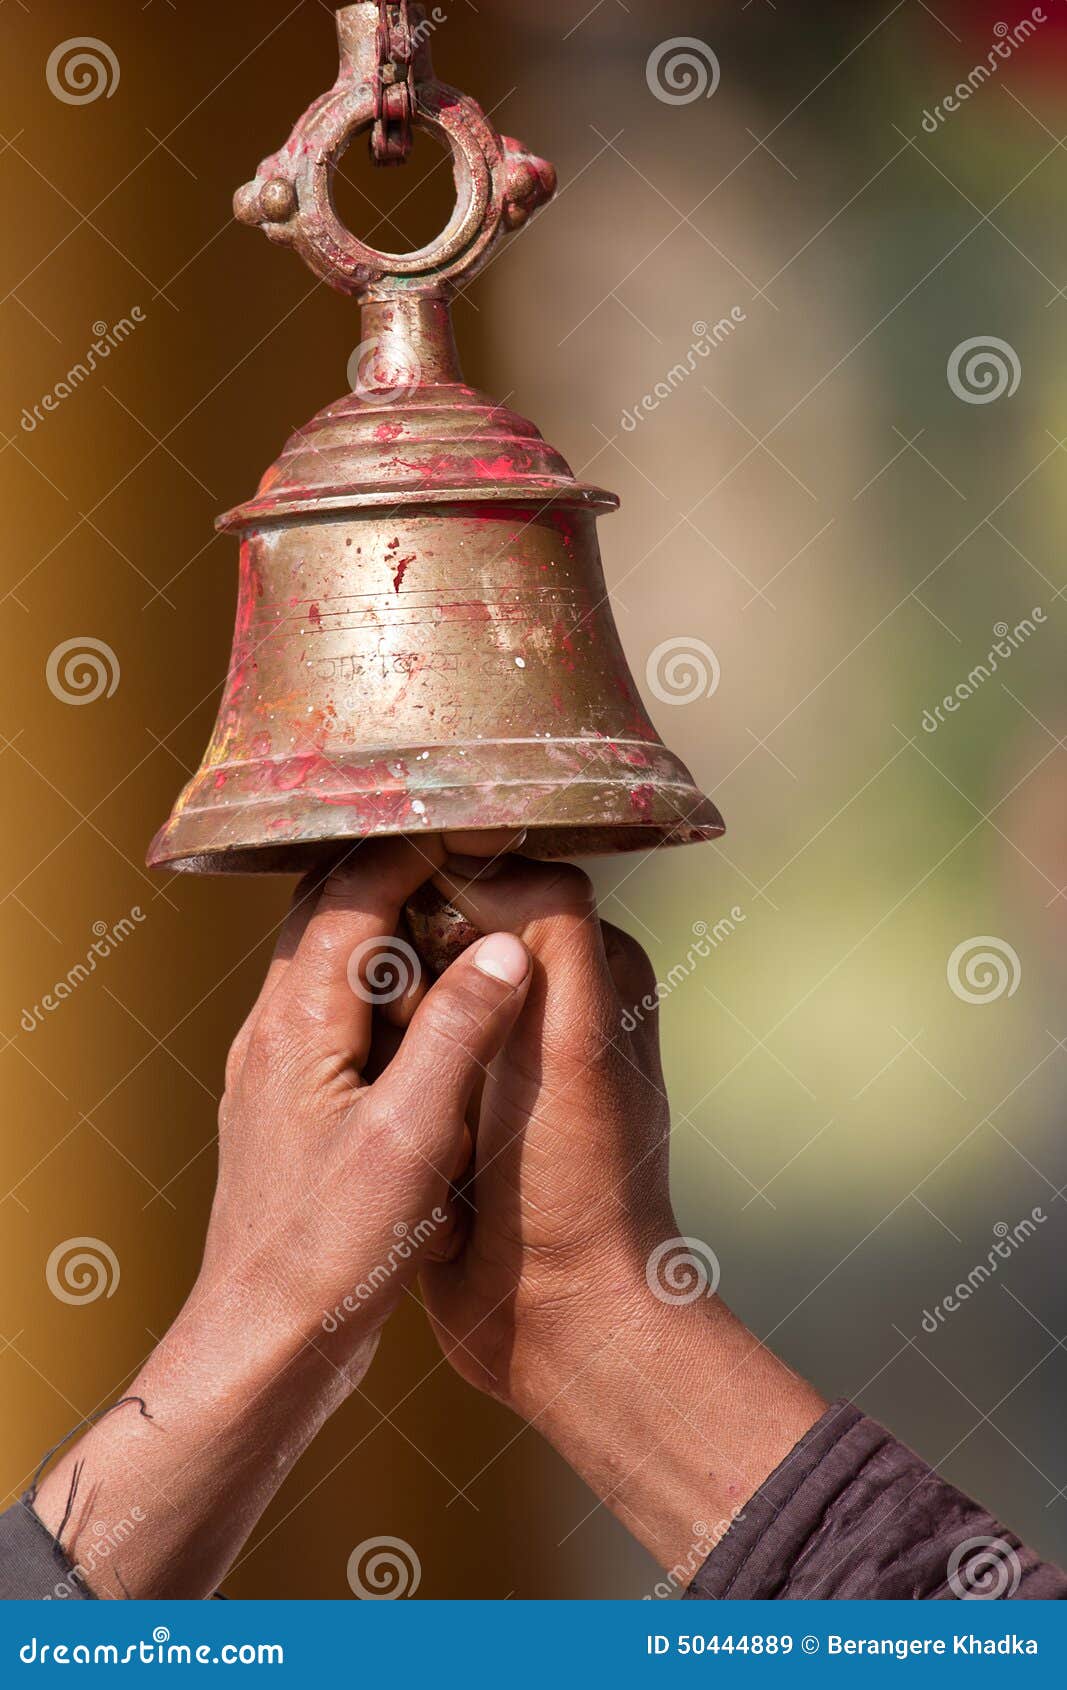 Why do Hindus ring the bell in temple | Sanskriti - Hinduism and Indian  Culture Website